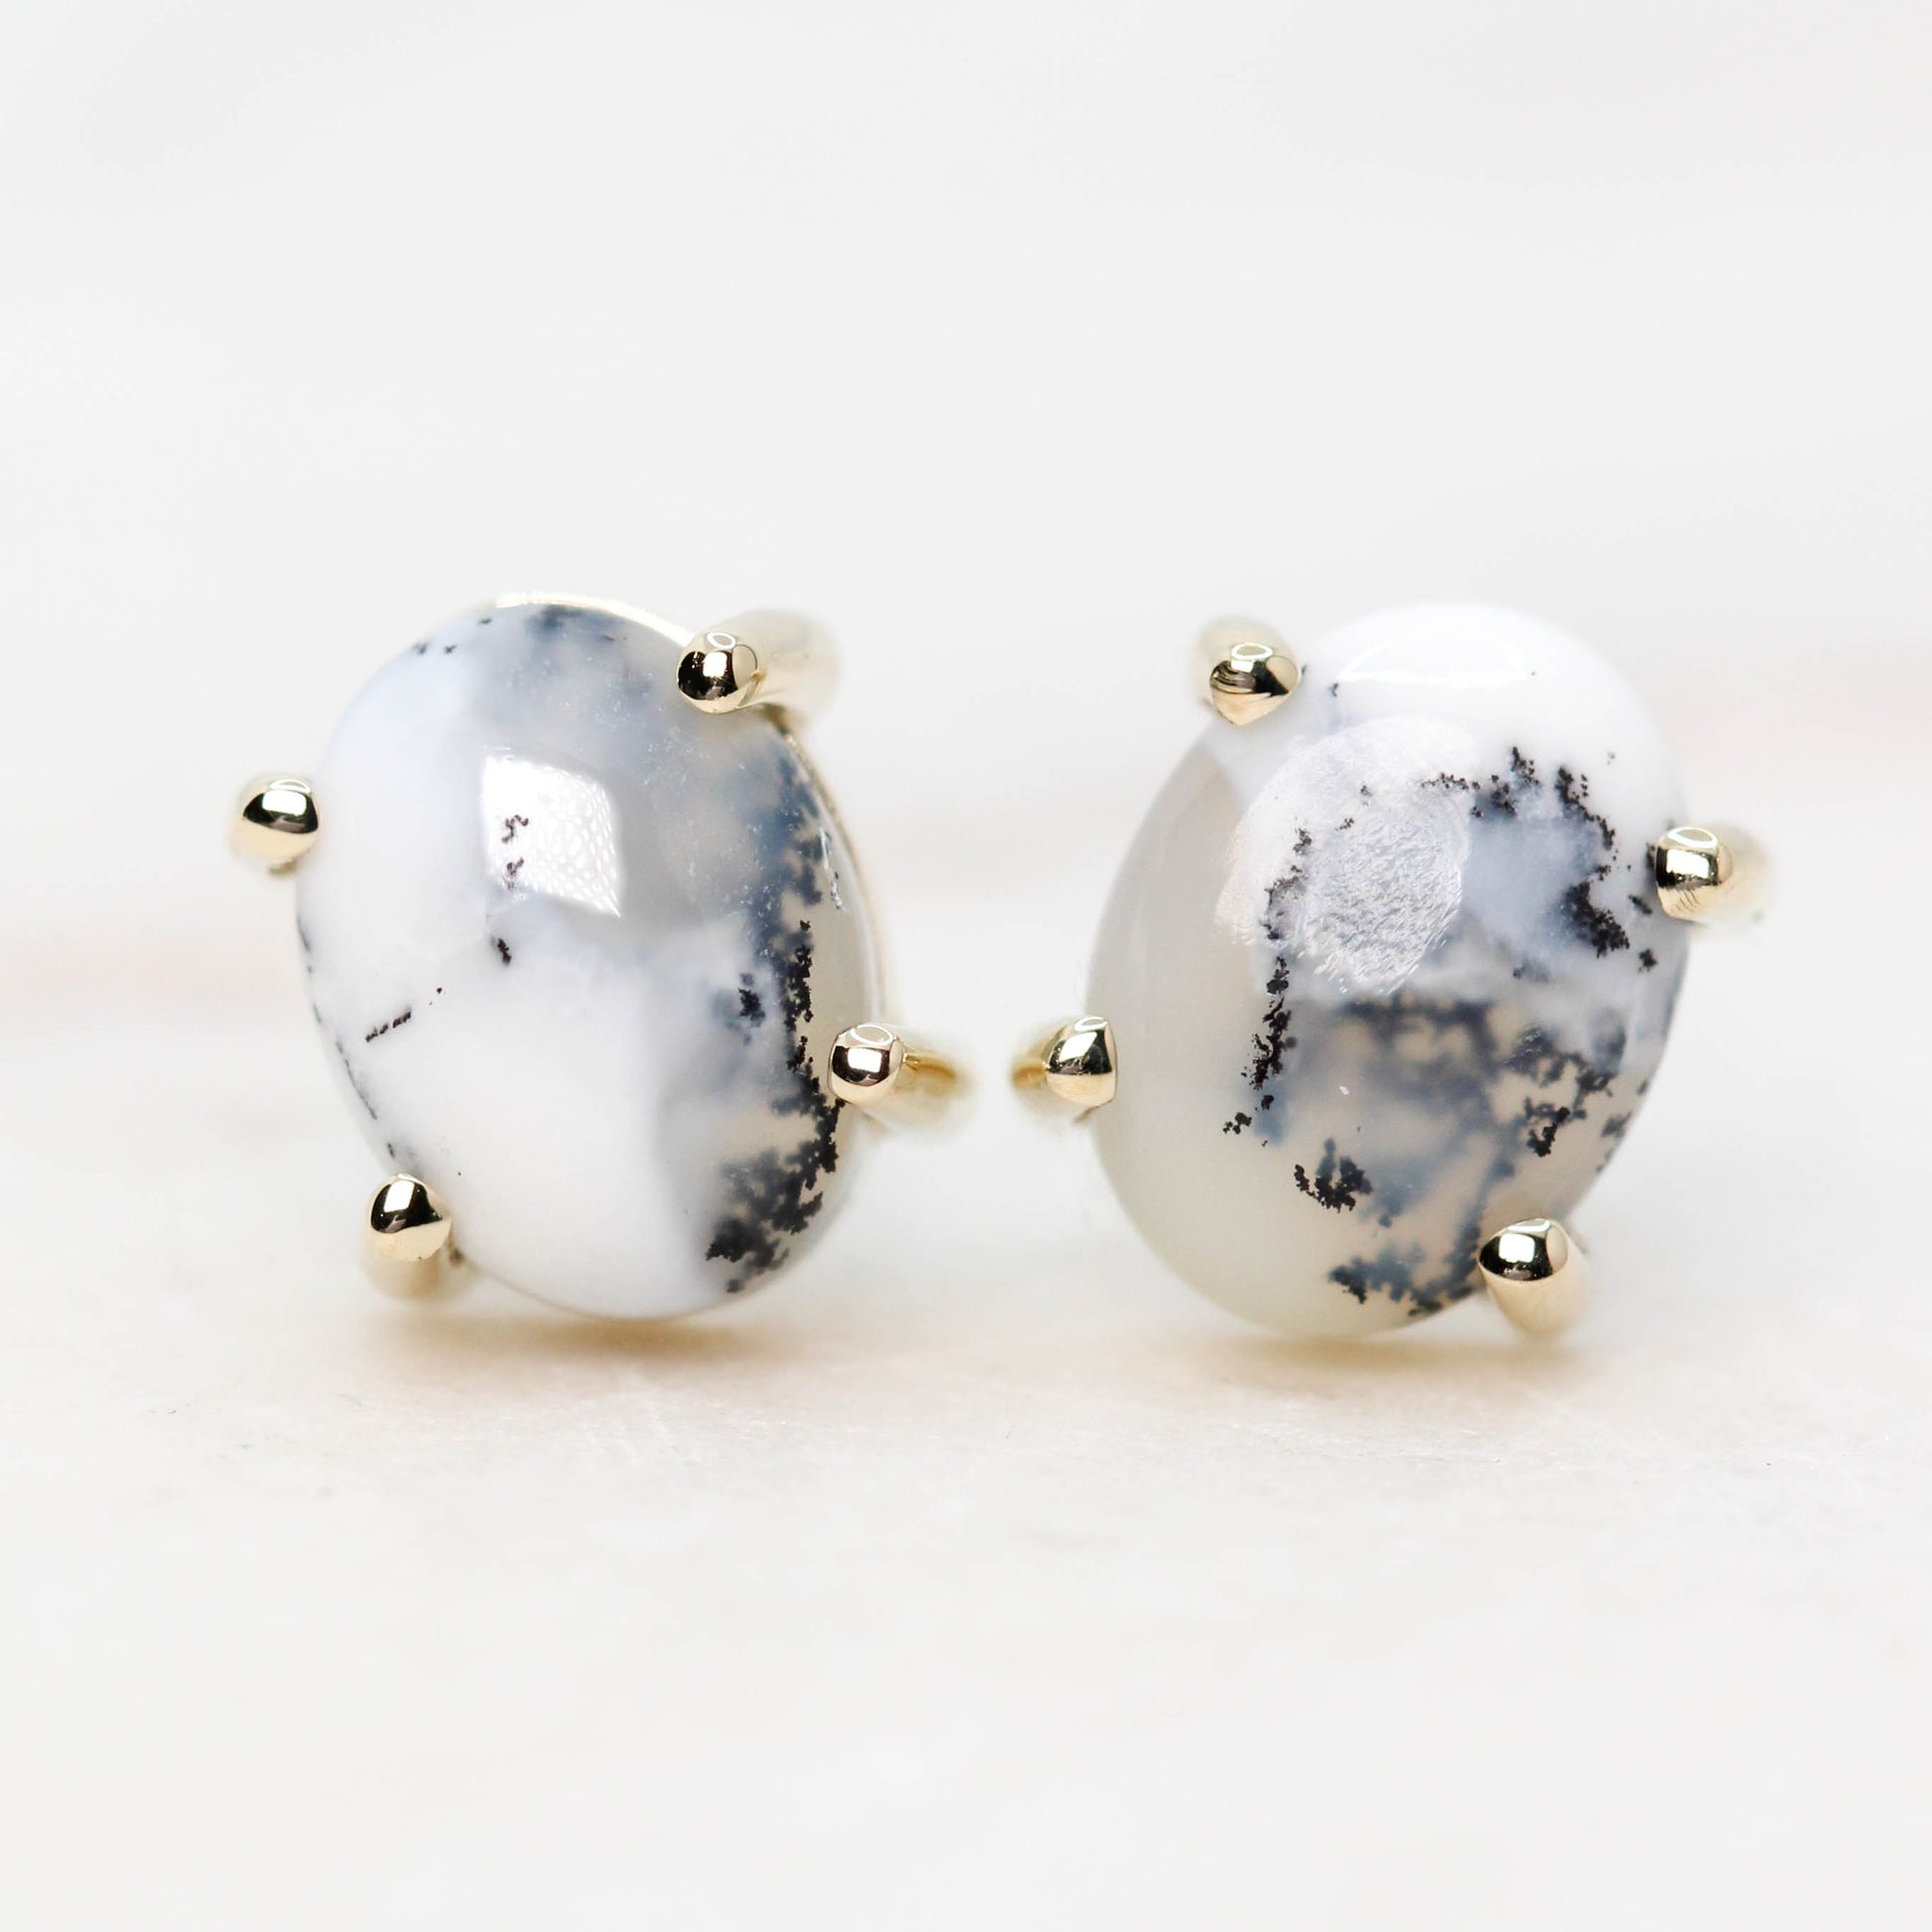 Oval White Dendritic Opal Earrings - 14k Yellow or Rose Gold - Midwinter Co. Alternative Bridal Rings and Modern Fine Jewelry